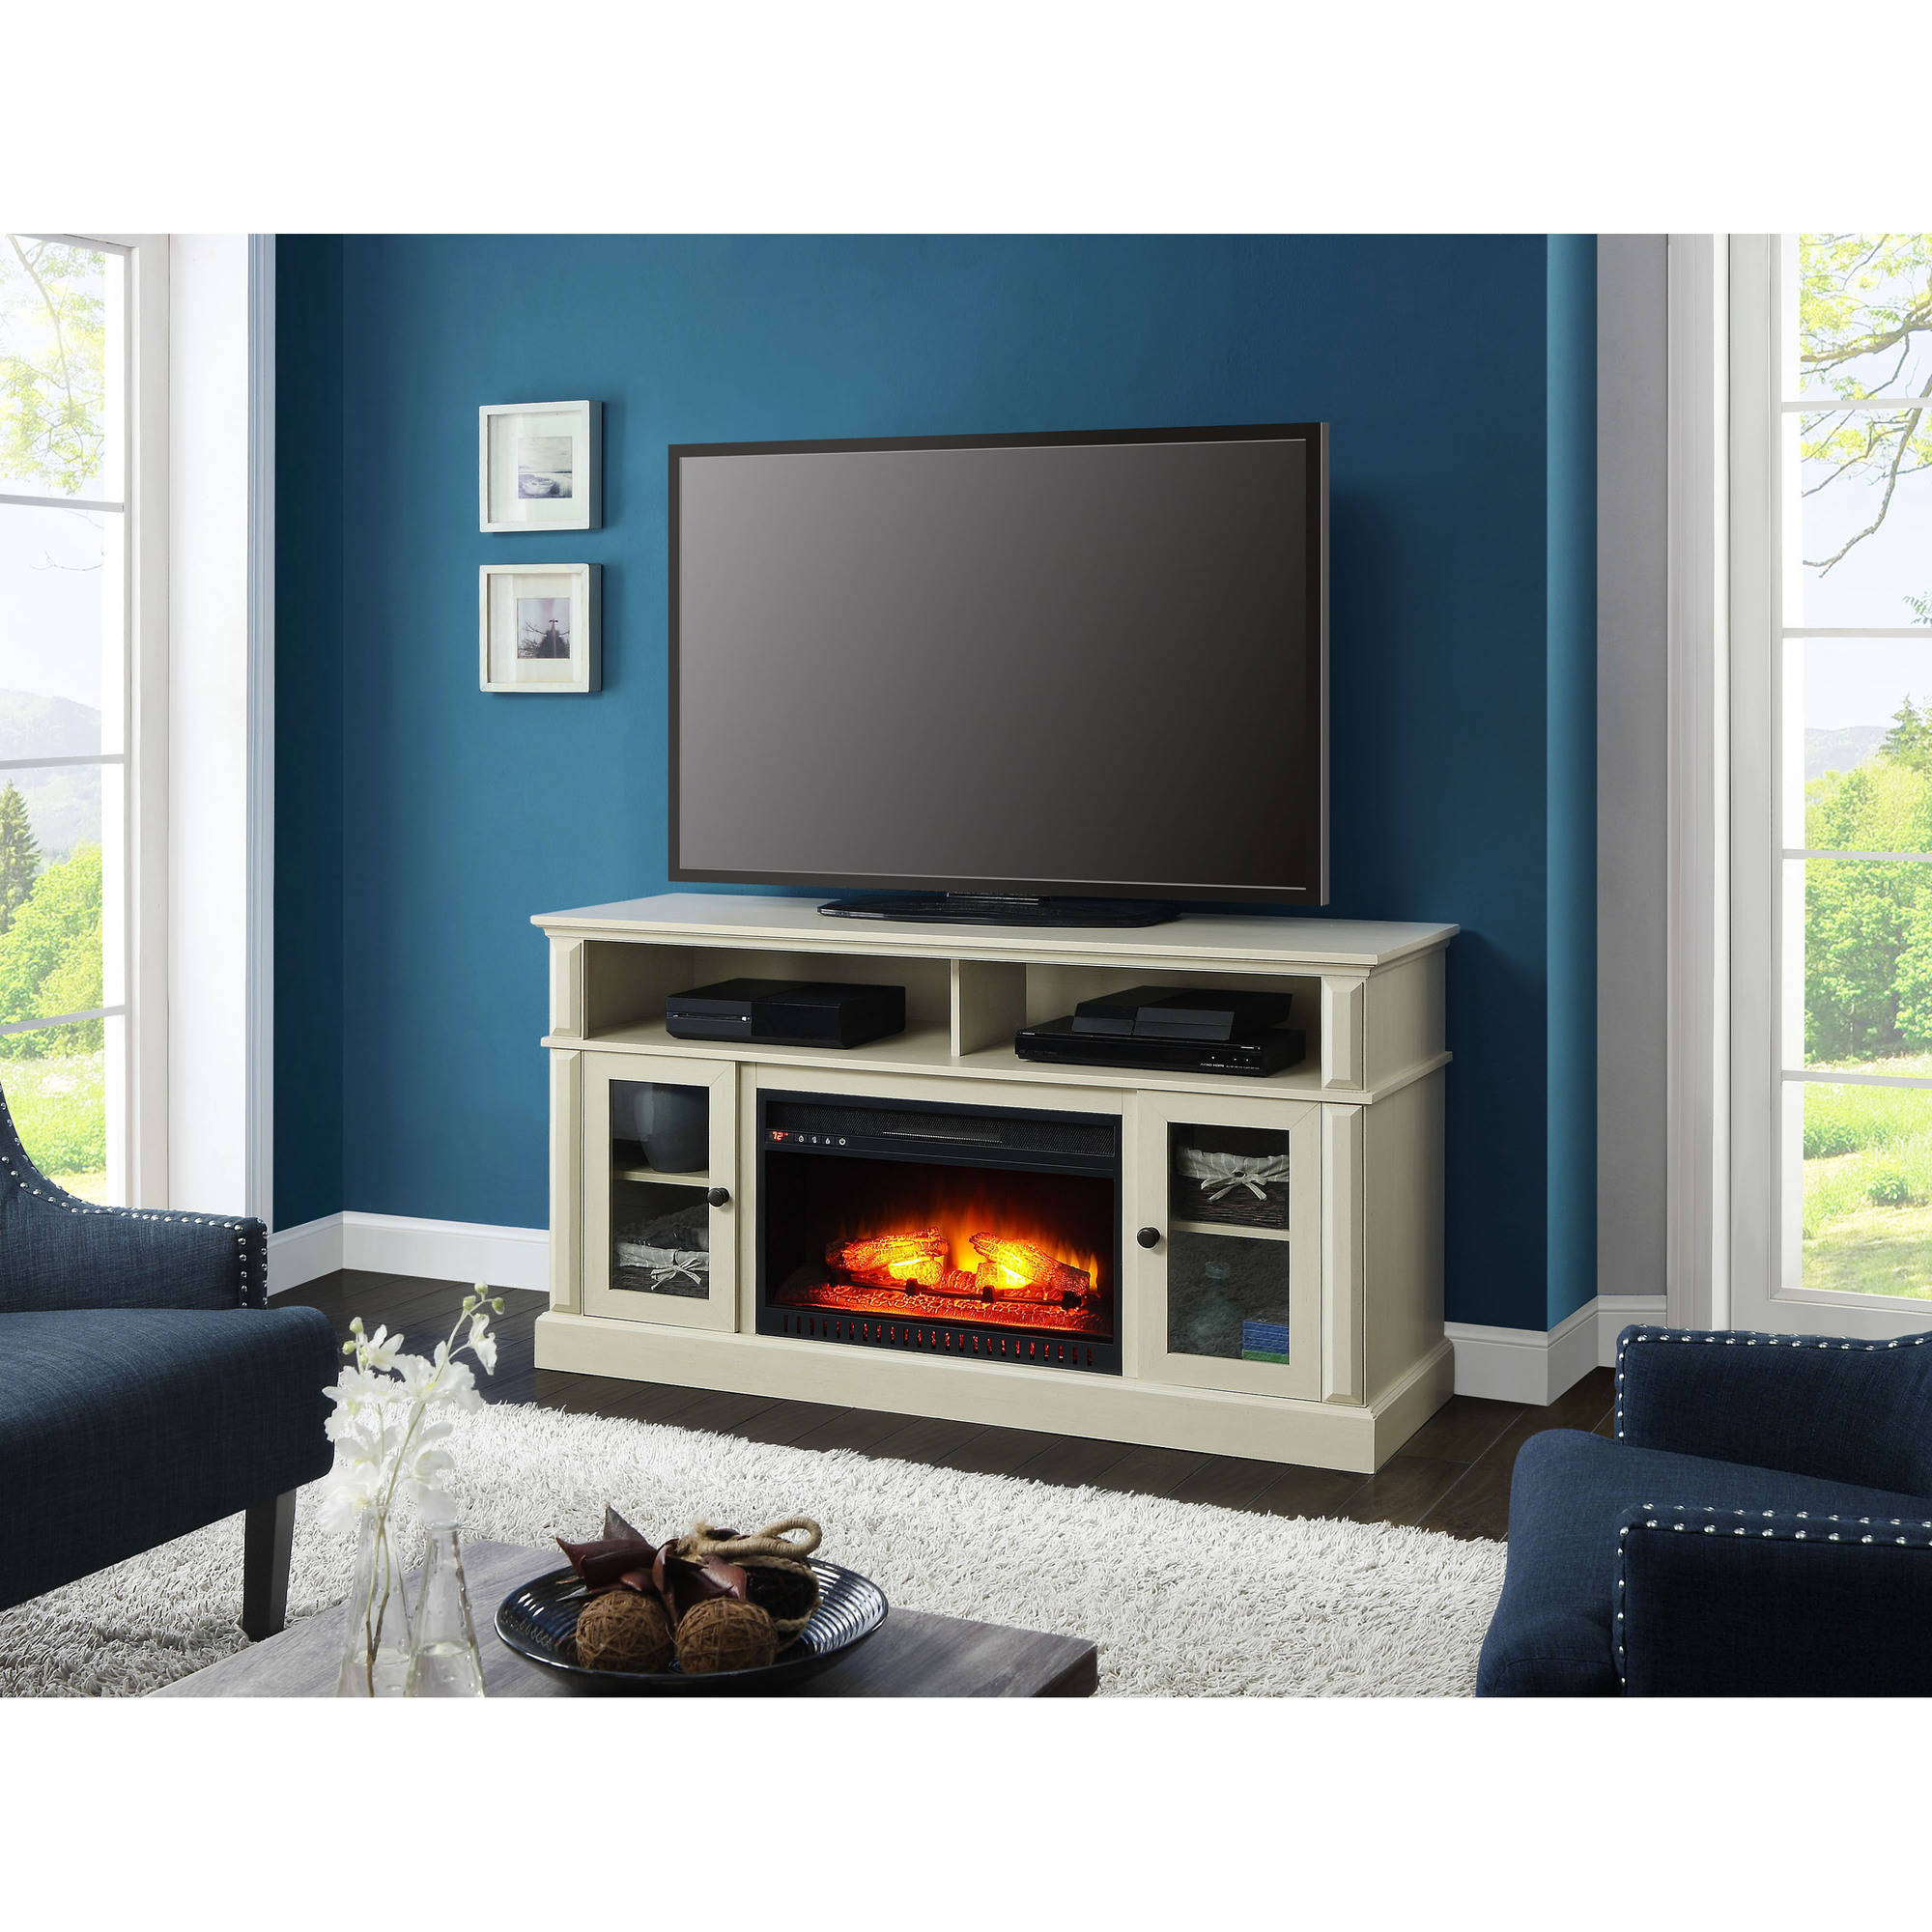 60 Inch Tv Stand with Fireplace Elegant Whalen Barston Media Fireplace for Tv S Up to 70 Multiple